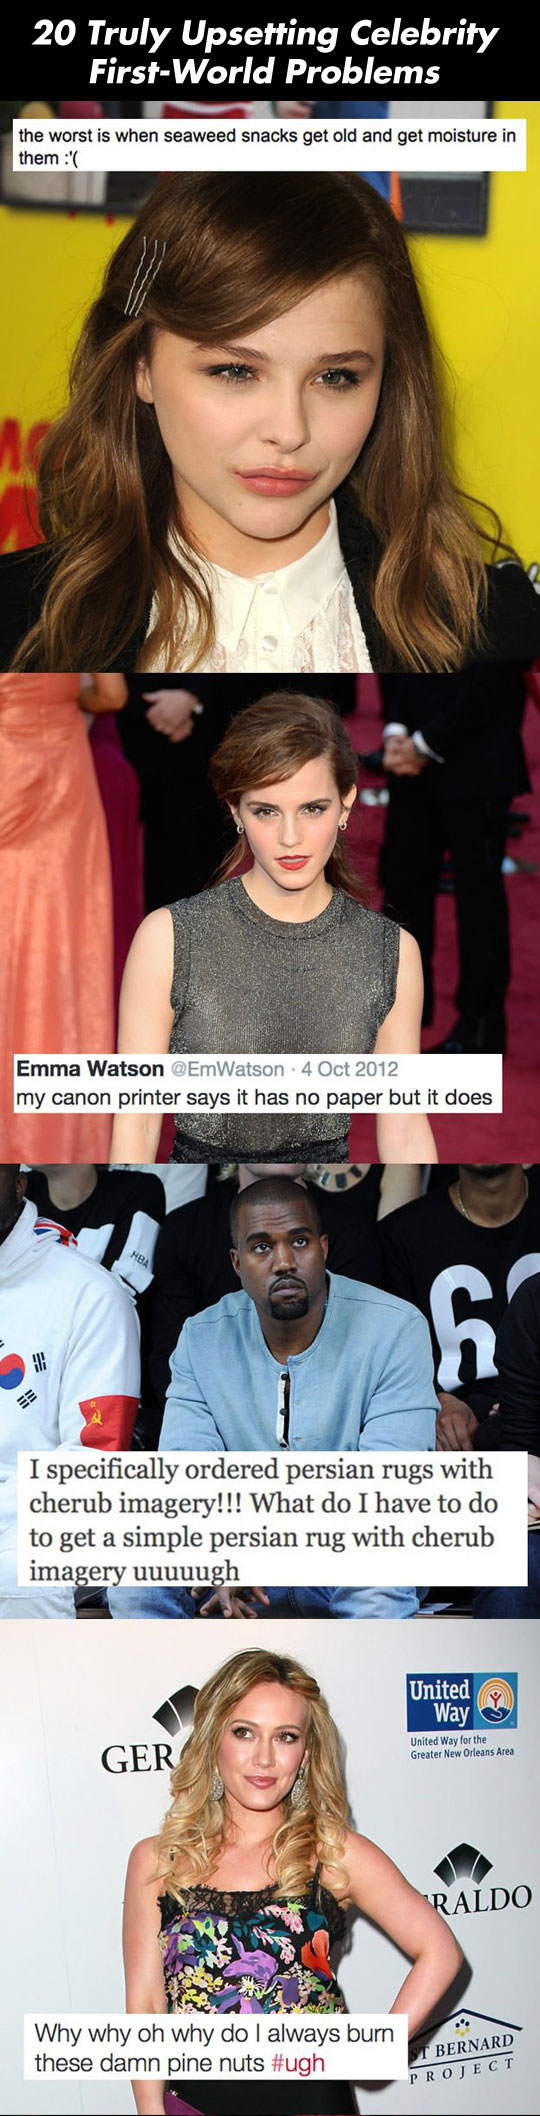 Truly Upsetting Celebrity First-World Problems